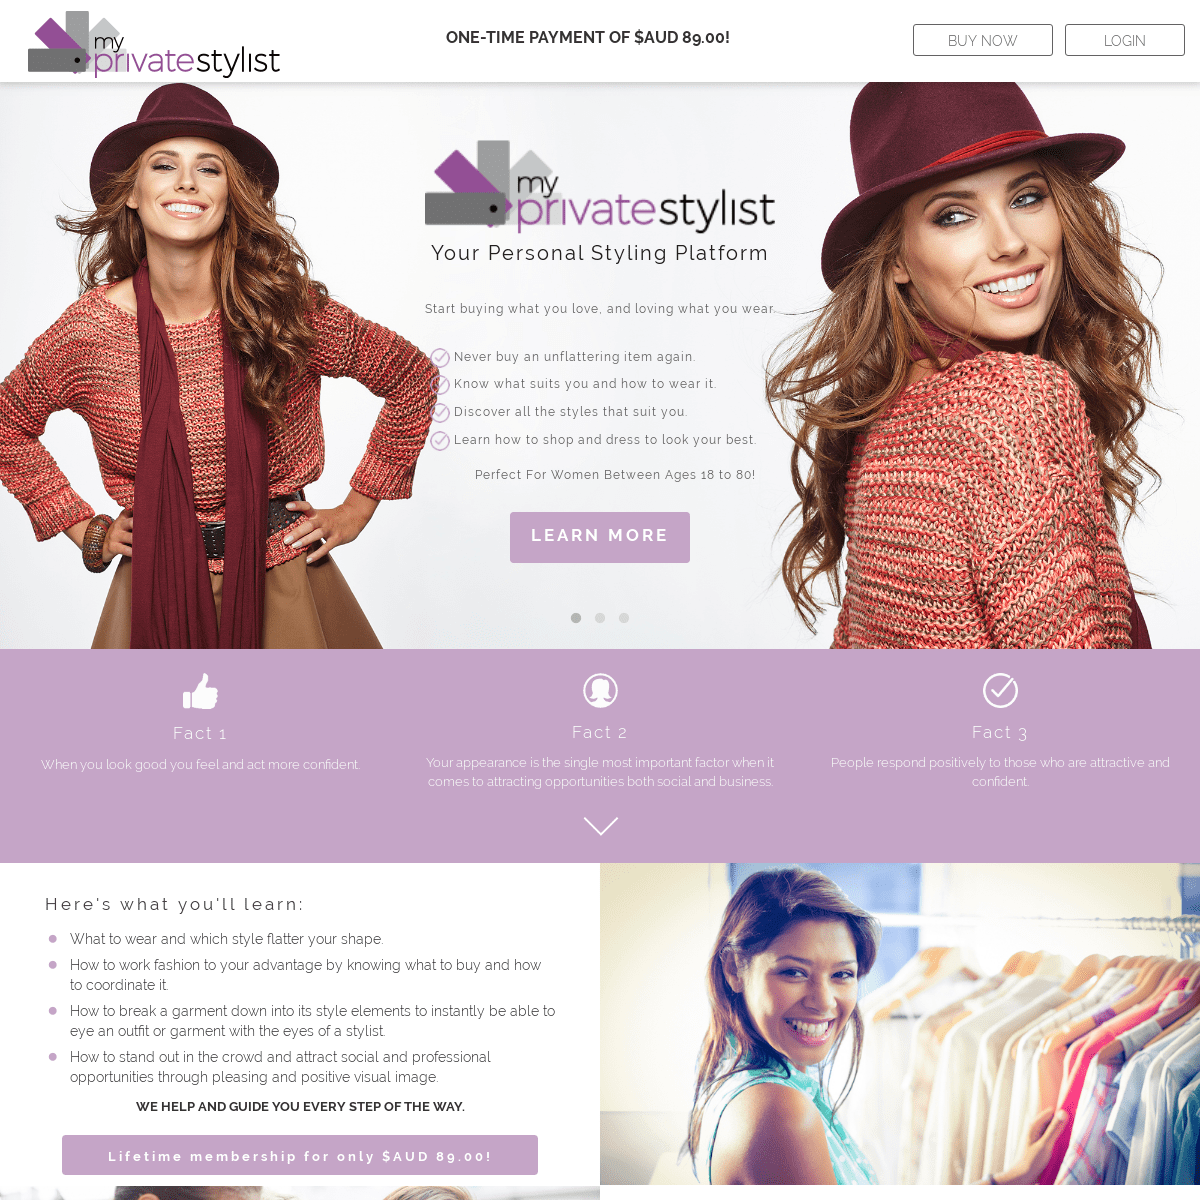 A complete backup of myprivatestylist.com